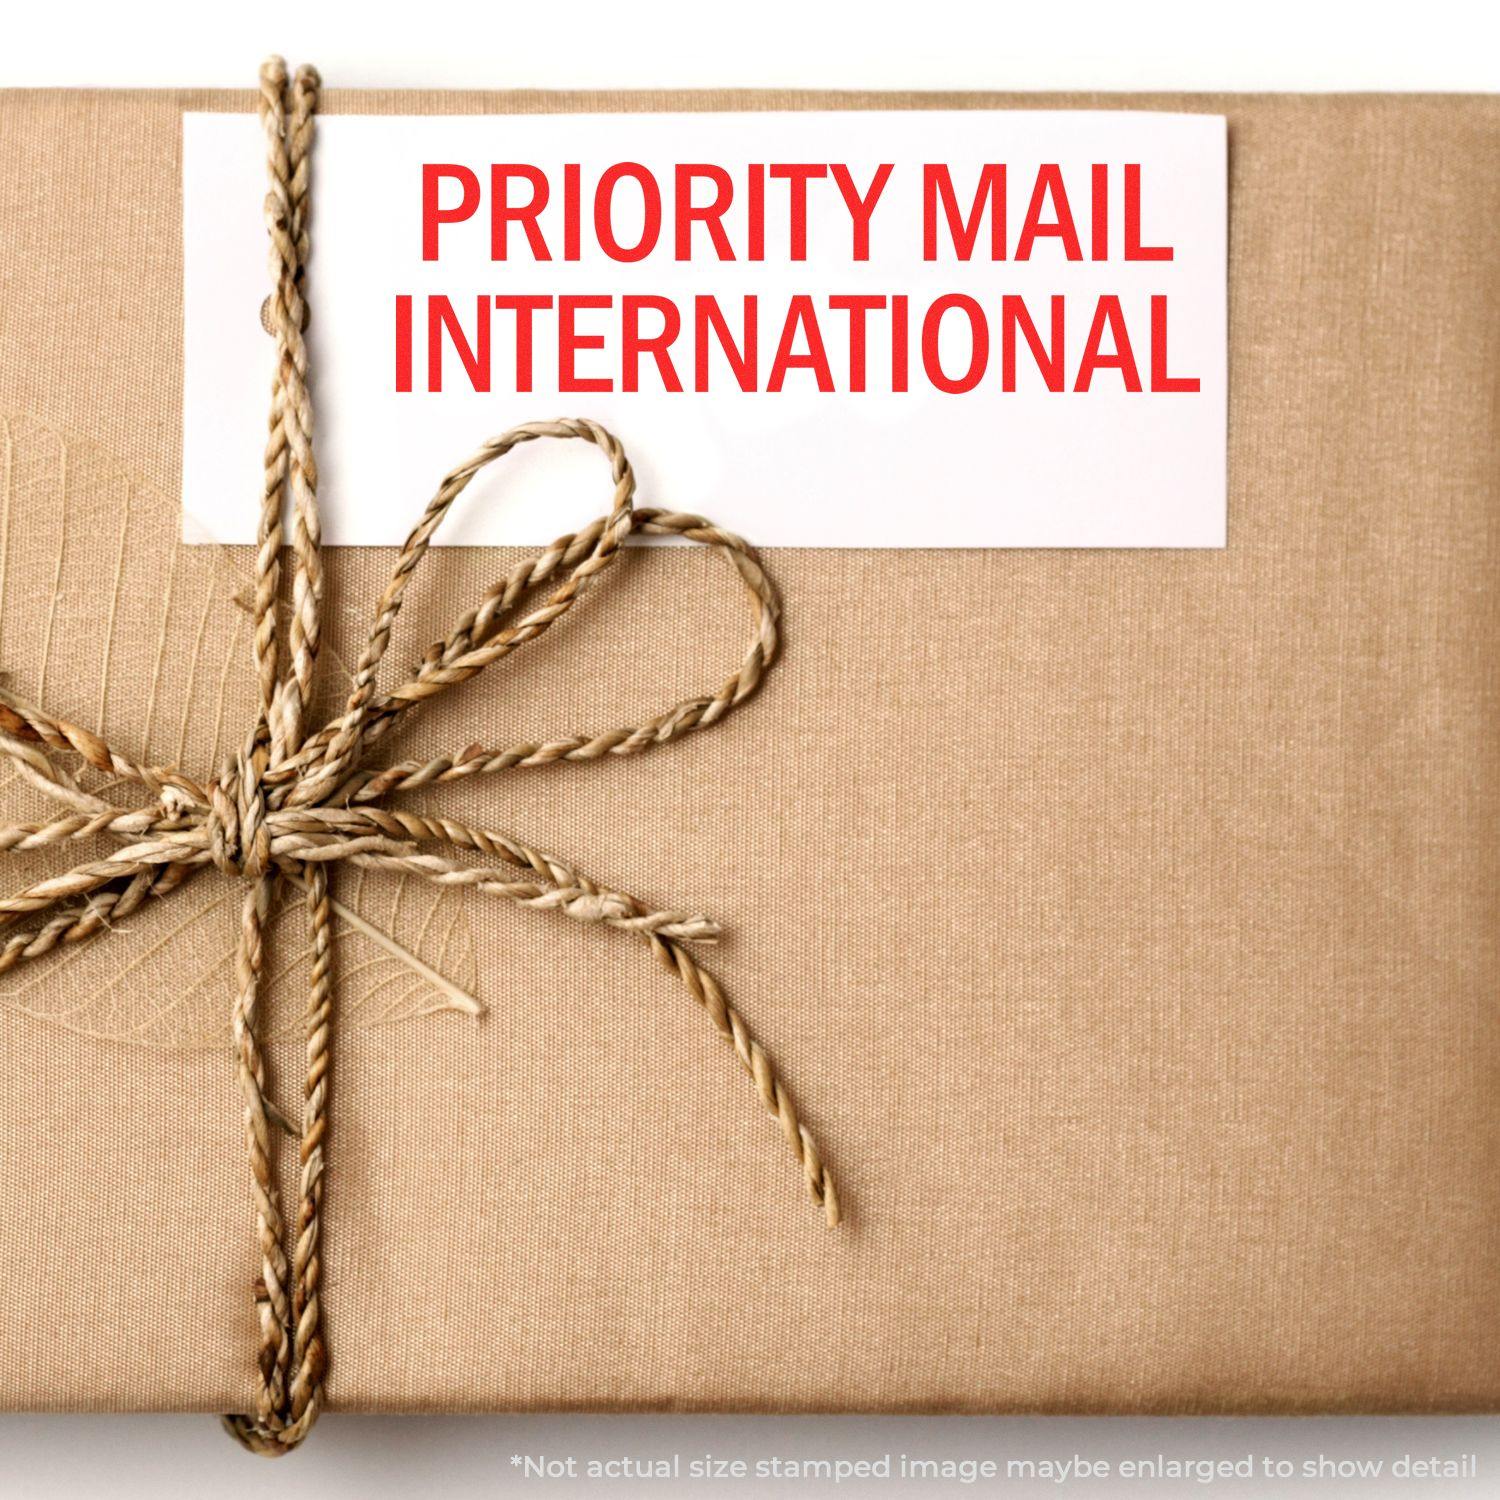 A stock office rubber stamp with a stamped image showing how the text "PRIORITY MAIL INTERNATIONAL" in a large font is displayed after stamping.